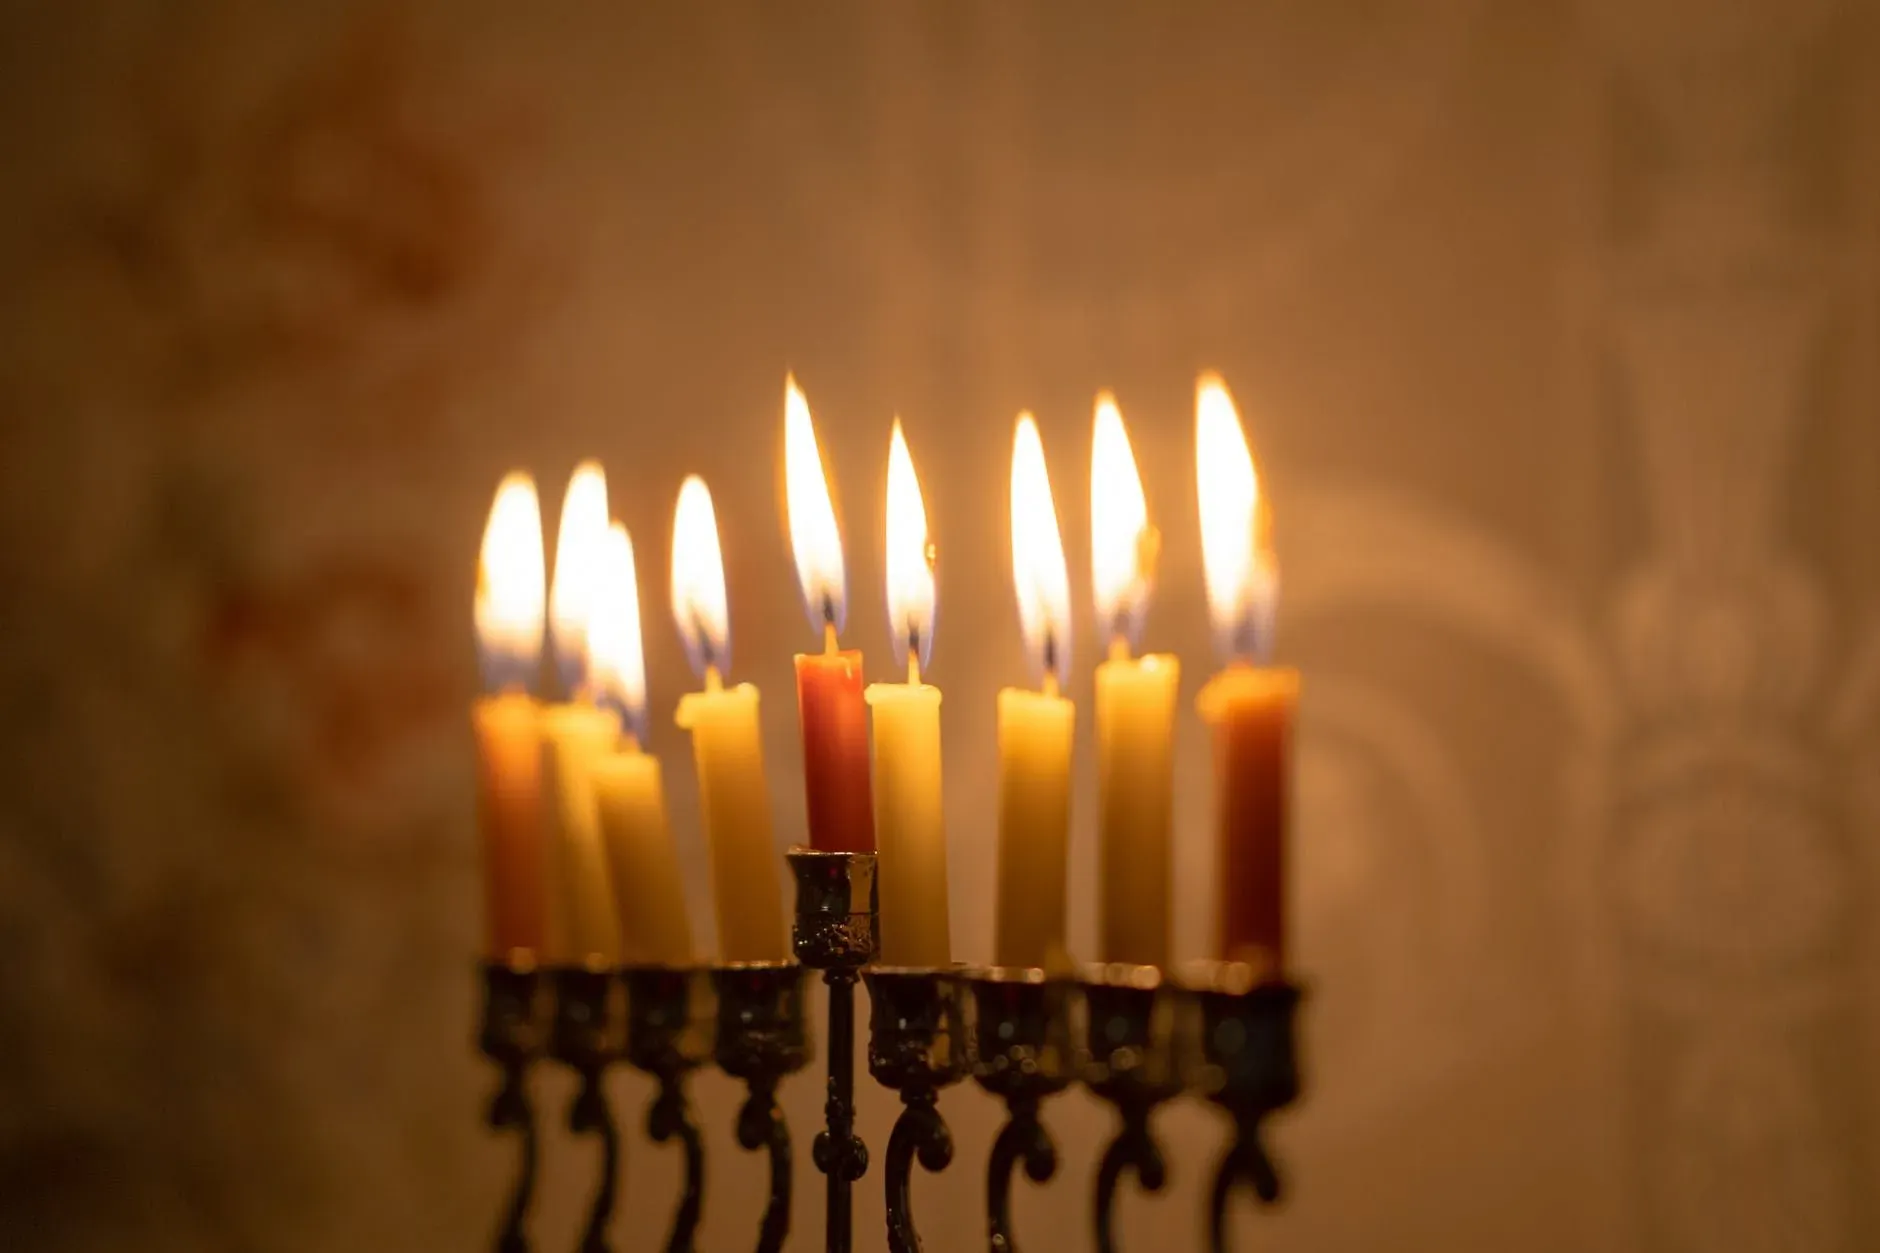 Sabbath rest is observed by lighting the candles.